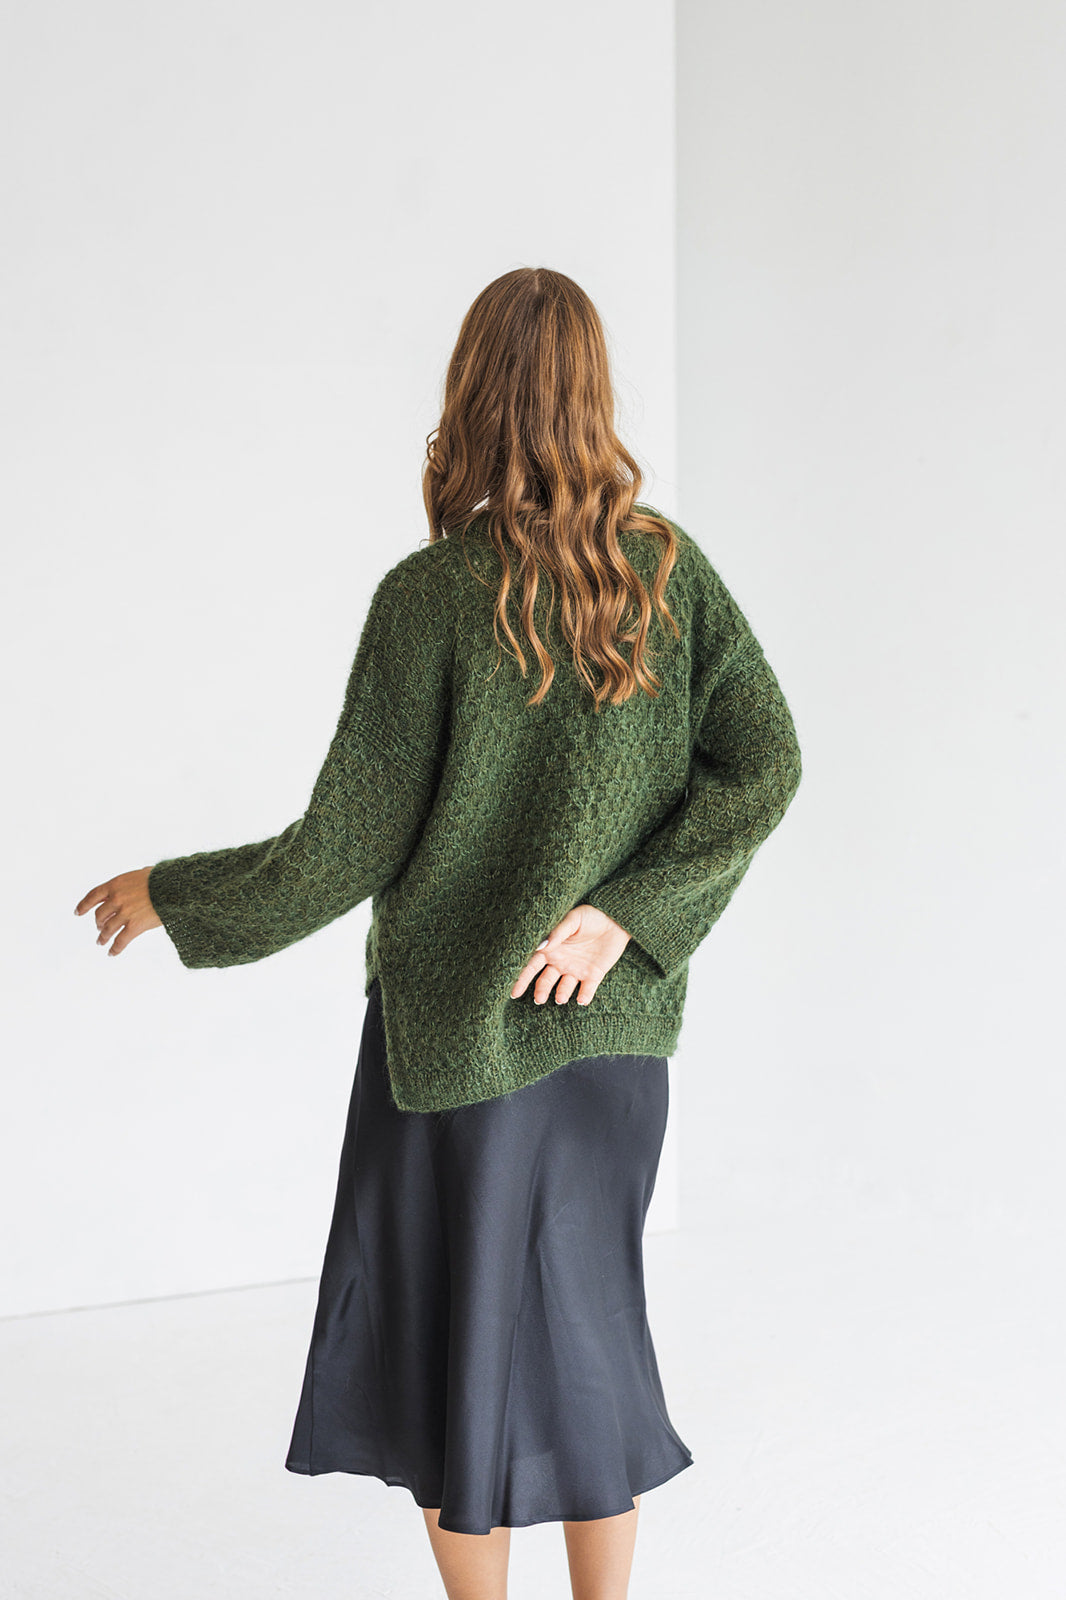 Green mohair knitted sweater, wide sleeves alpaca wool blend jumper, fuzzy cable knit pullover, fluffy slightly oversized thick sweater gift